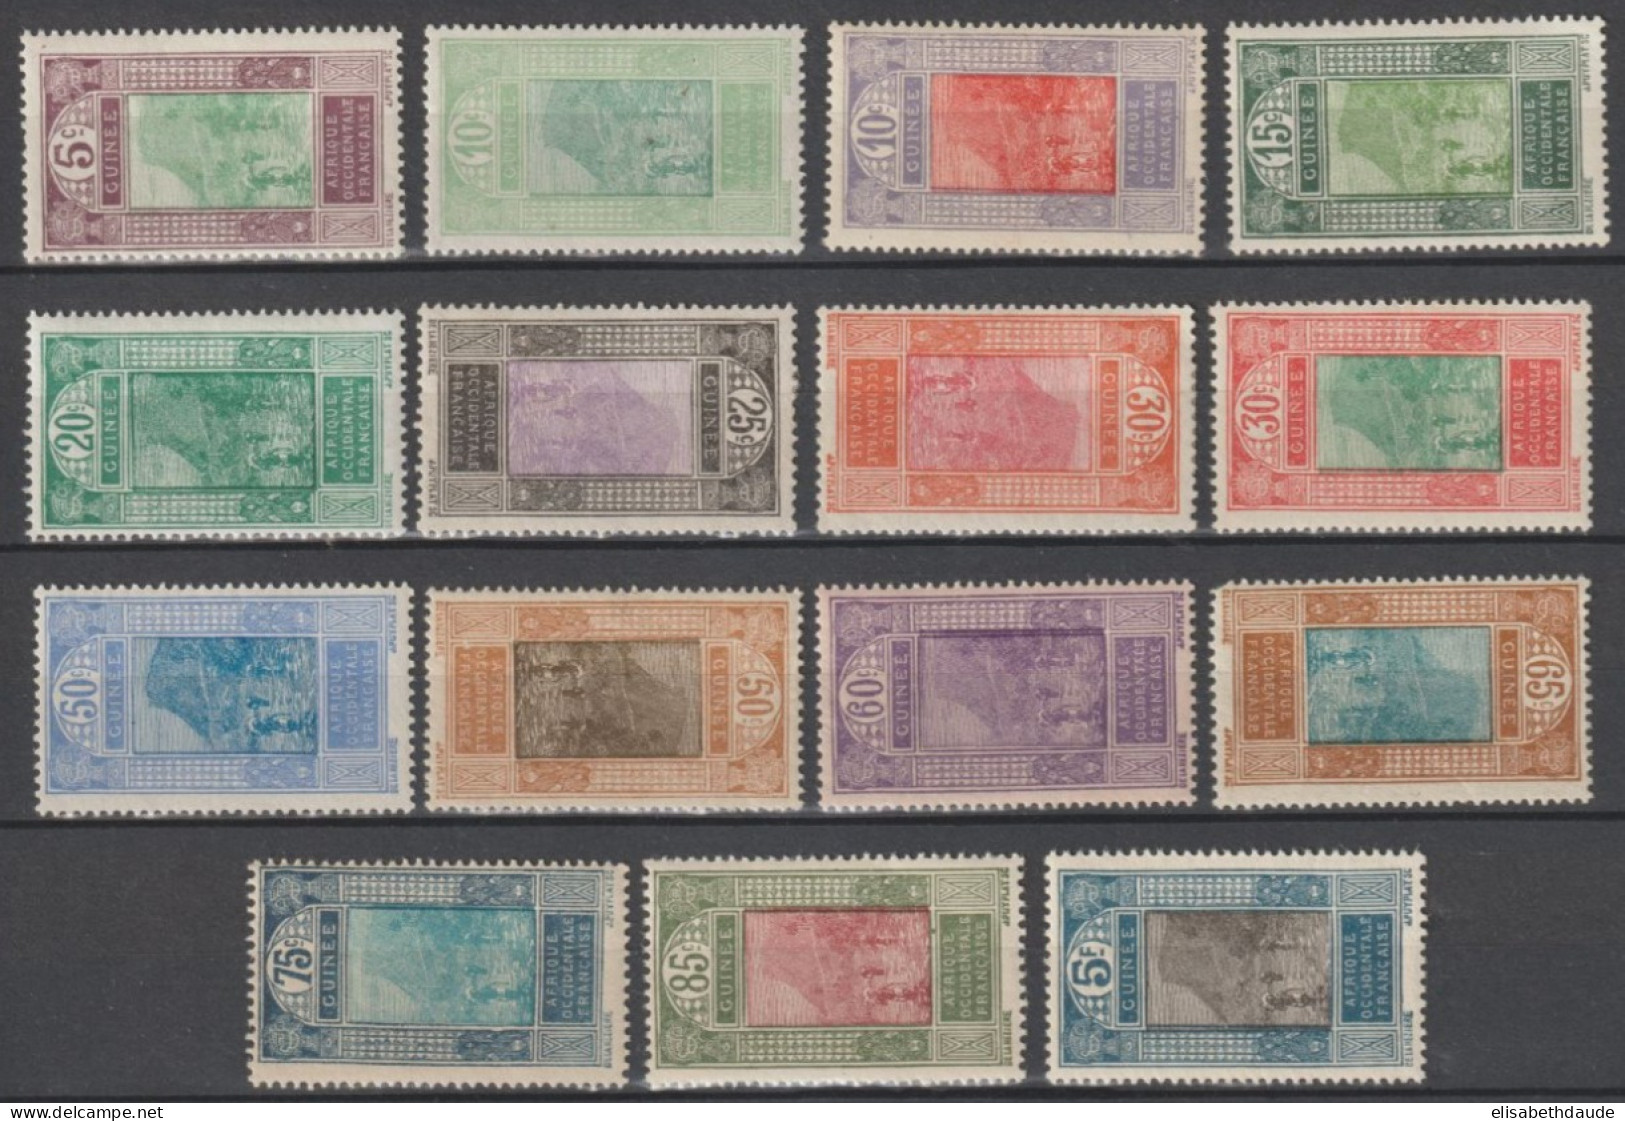 GUINEE - 1922 - SERIE COMPLETE YVERT N°84/98 ** MNH (QUELQUES * MH) - COTE = 22 EUR - Ungebraucht